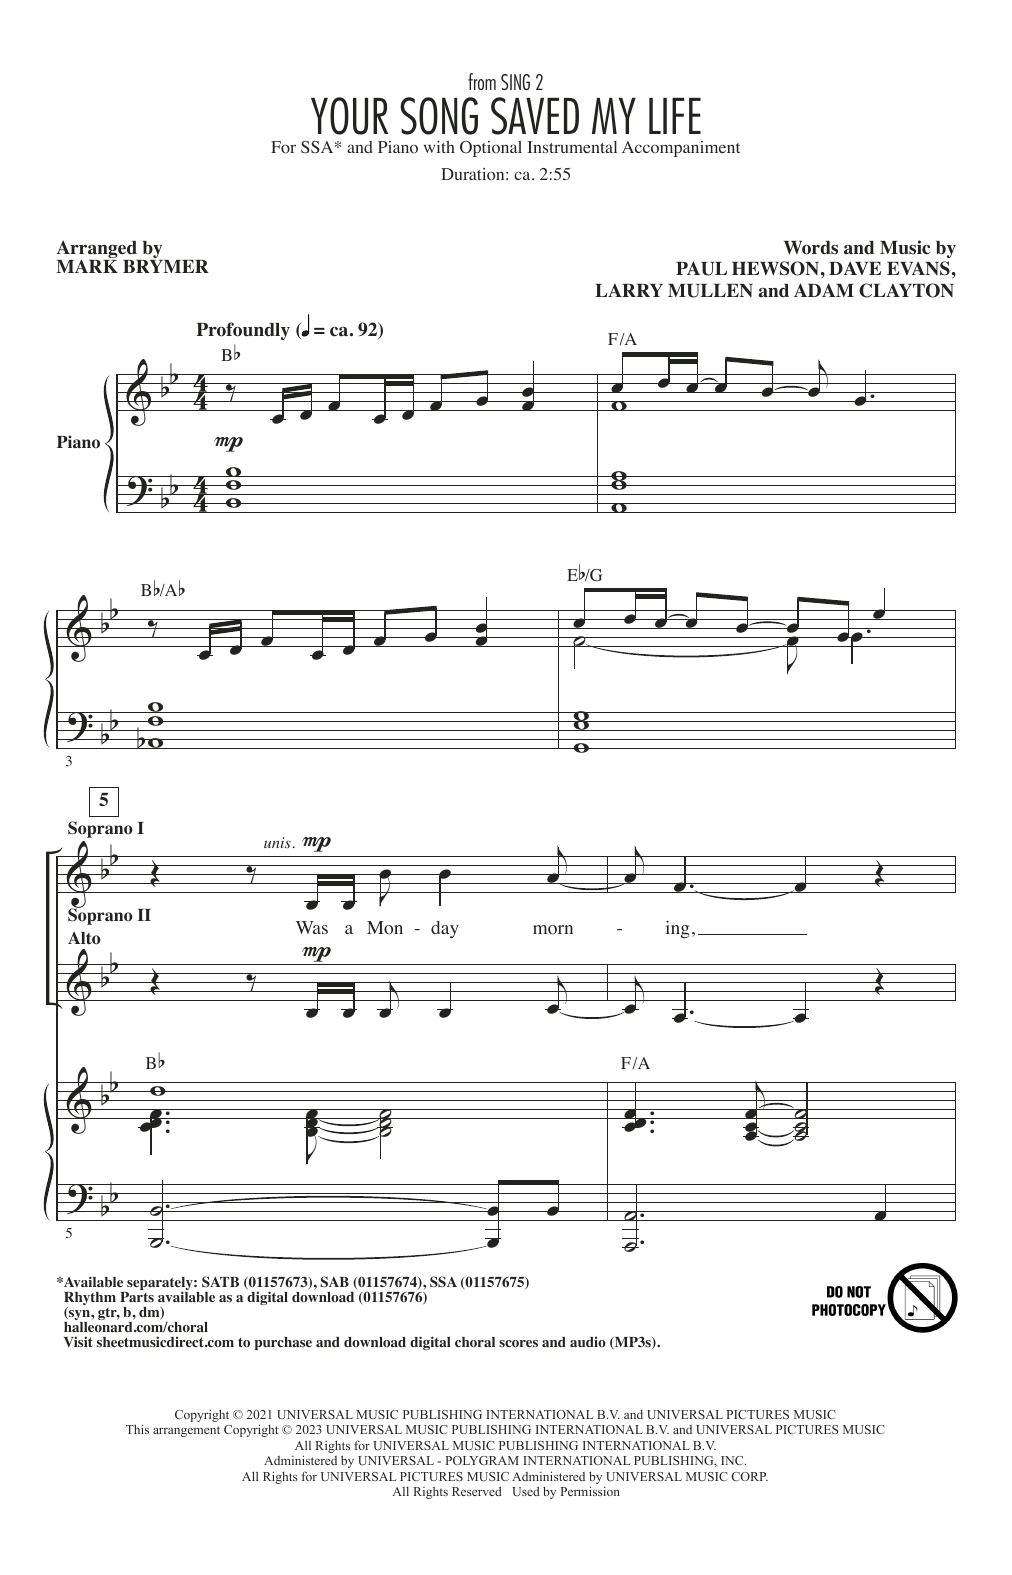 Download U2 Your Song Saved My Life (from Sing 2) ( Sheet Music